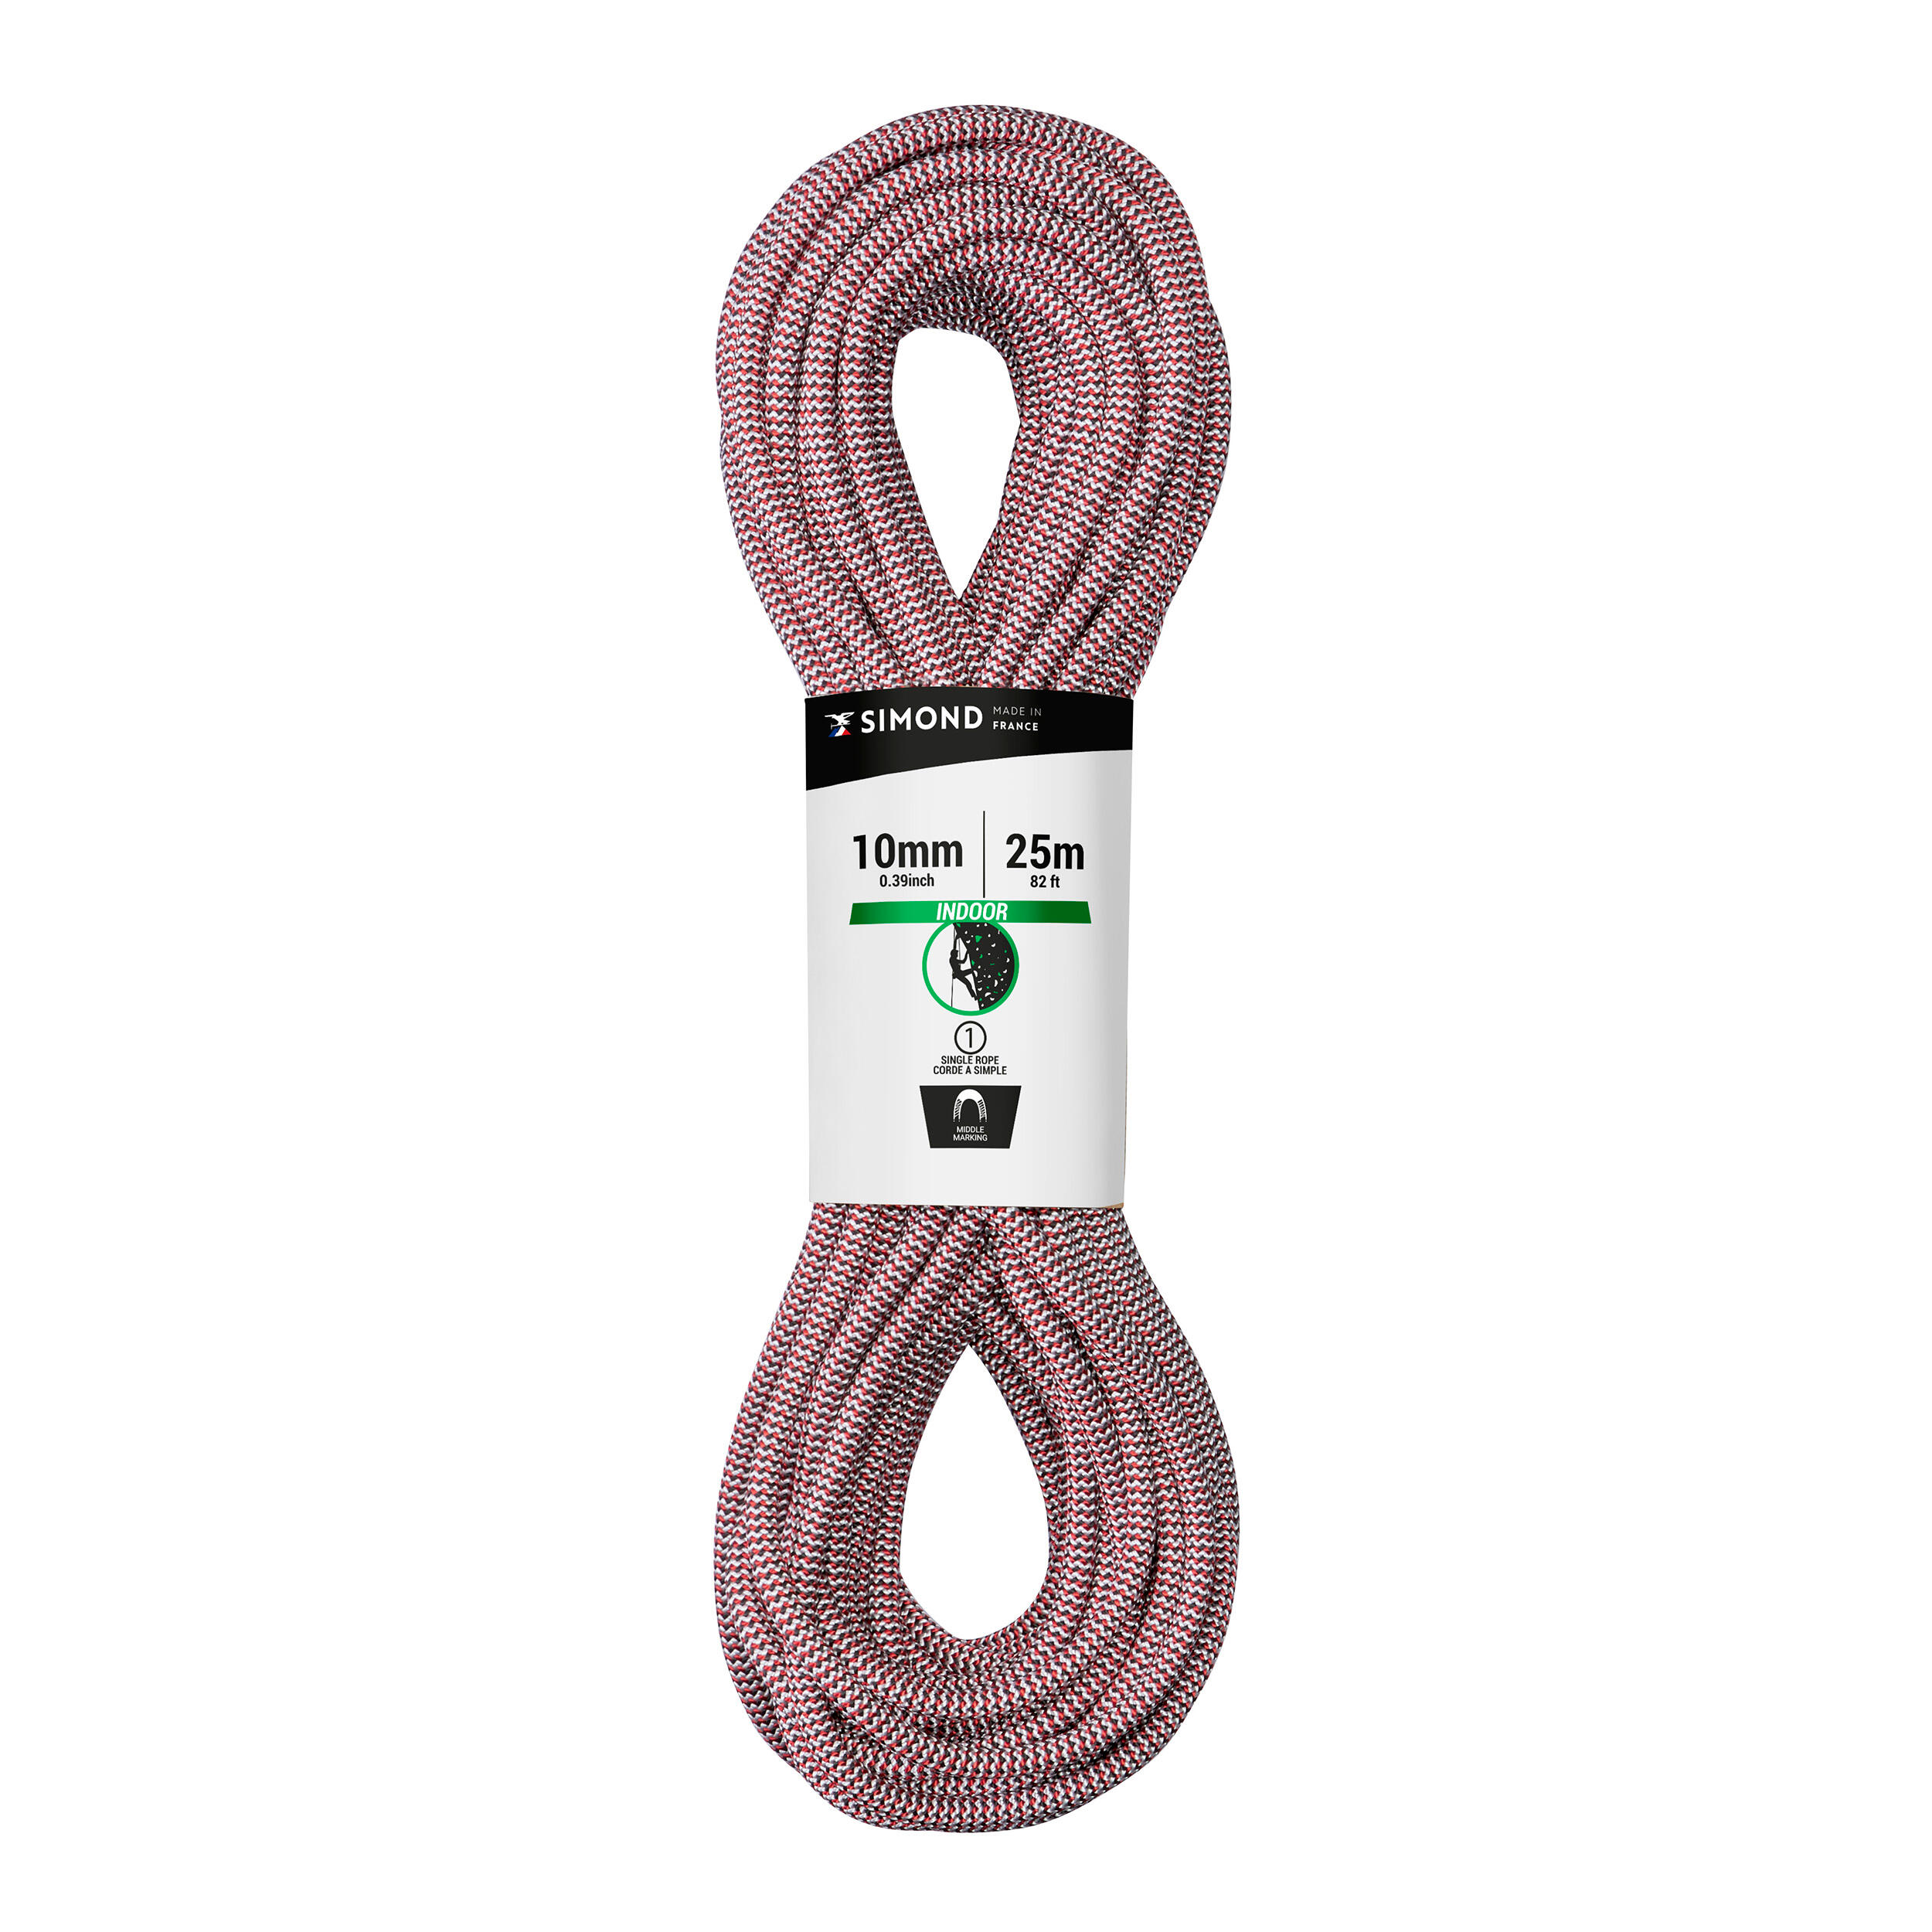 INDOOR CLIMBING ROPE 10 MM x 25 M - COLOUR RED 1/4